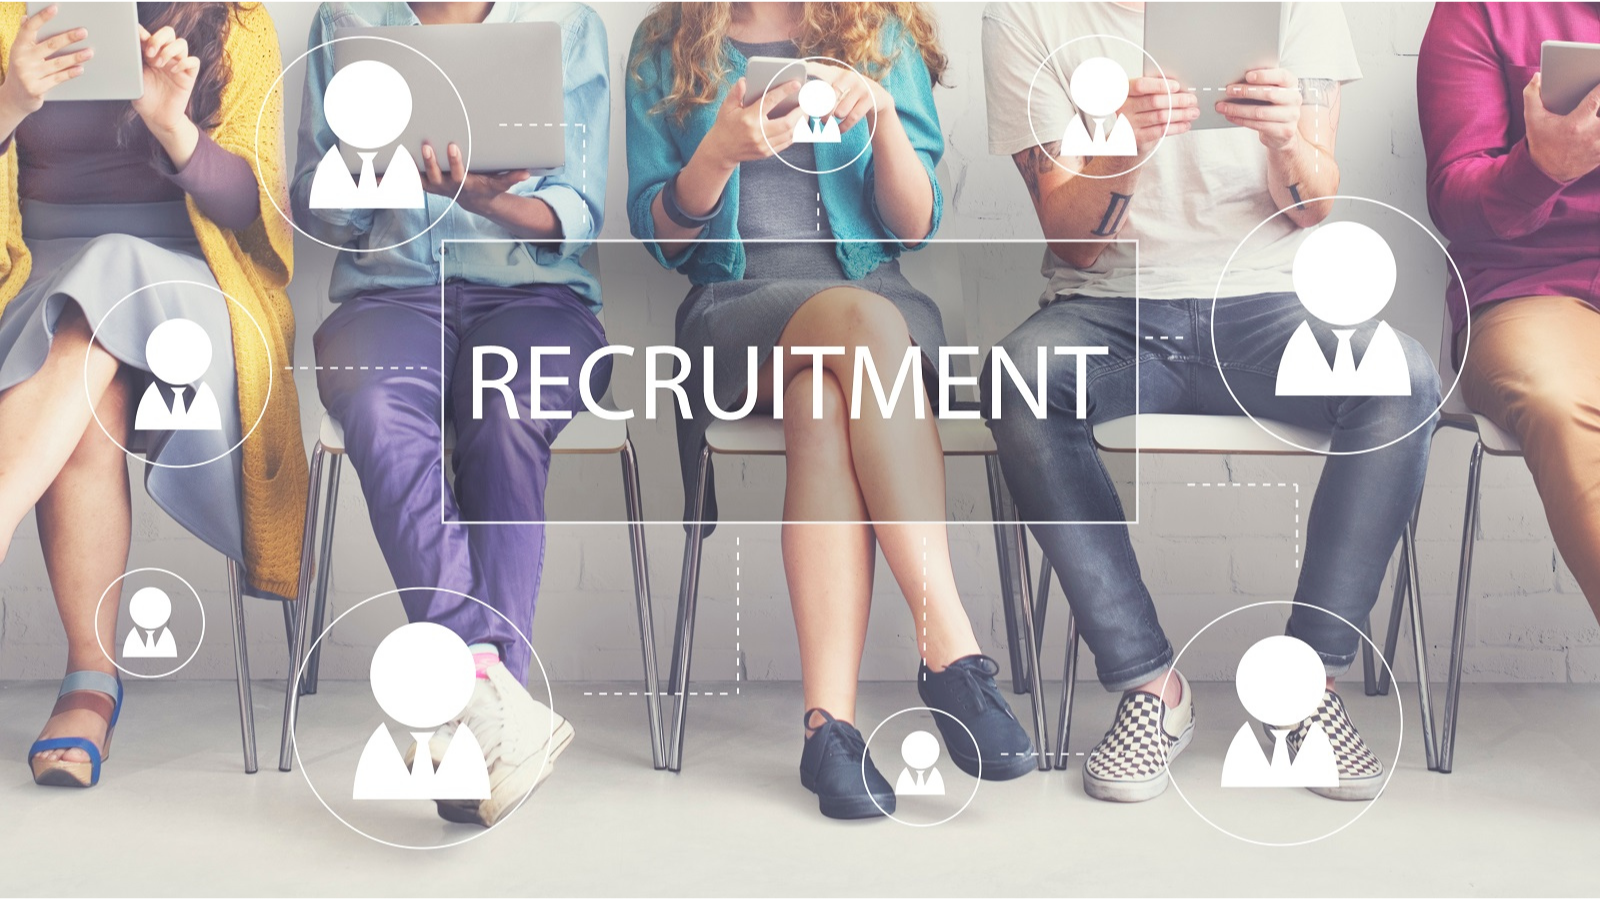 Agency Recruitment vs In-House Hiring: Which Is Right For Your Business?